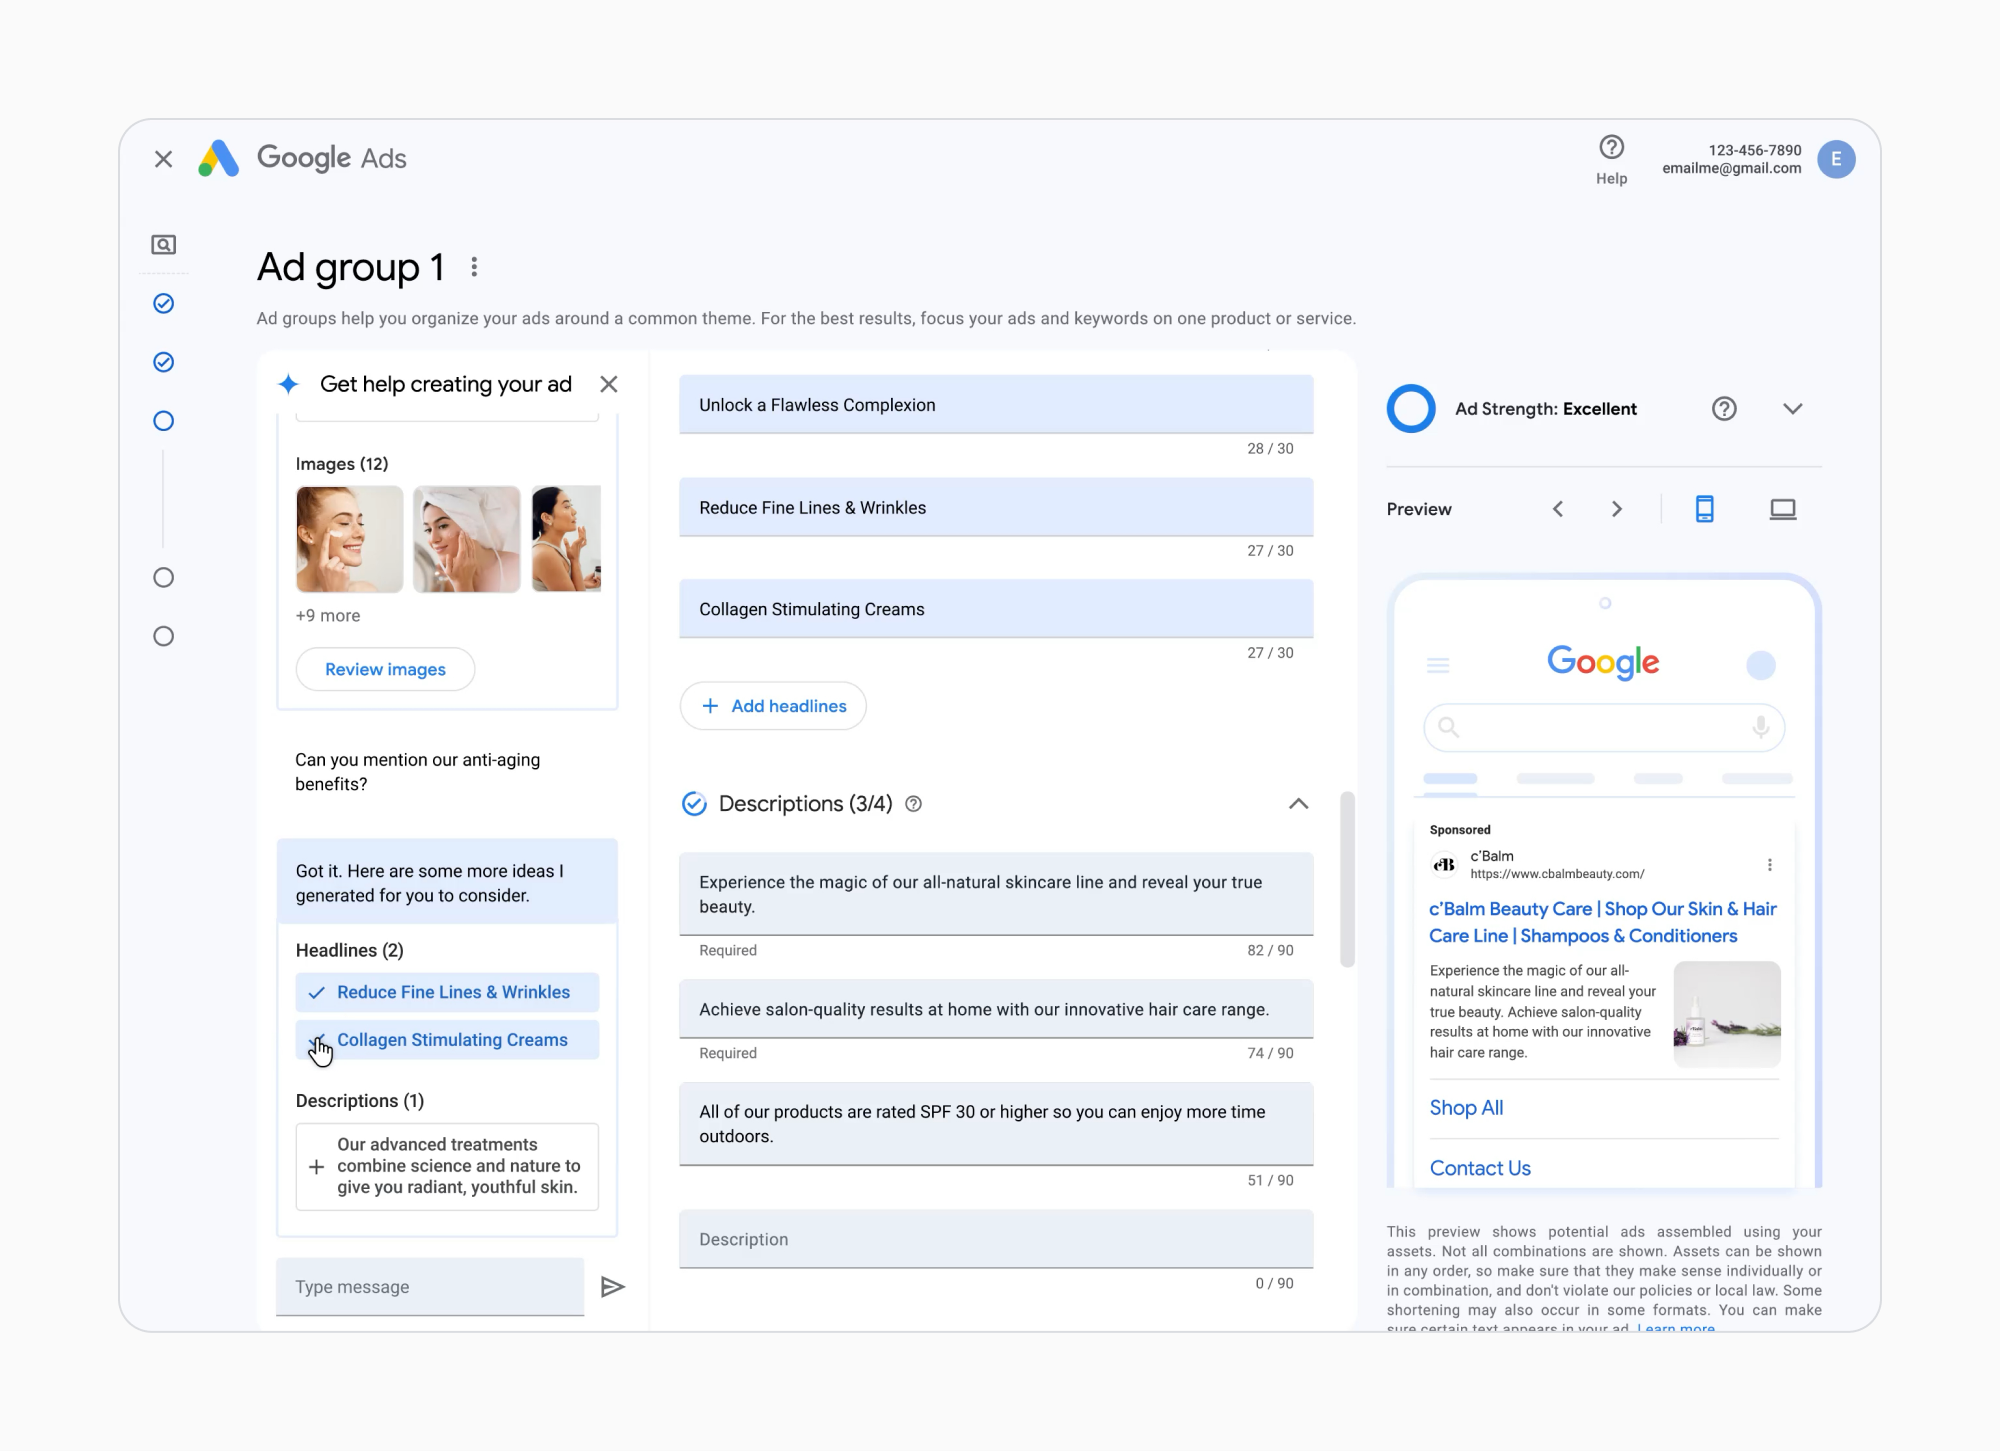 google marketing live 2023 automatically created assets aca google ads 5 646c2d1cf145b sej - Google Marketing Live 2023: What To Expect In AI Advancements